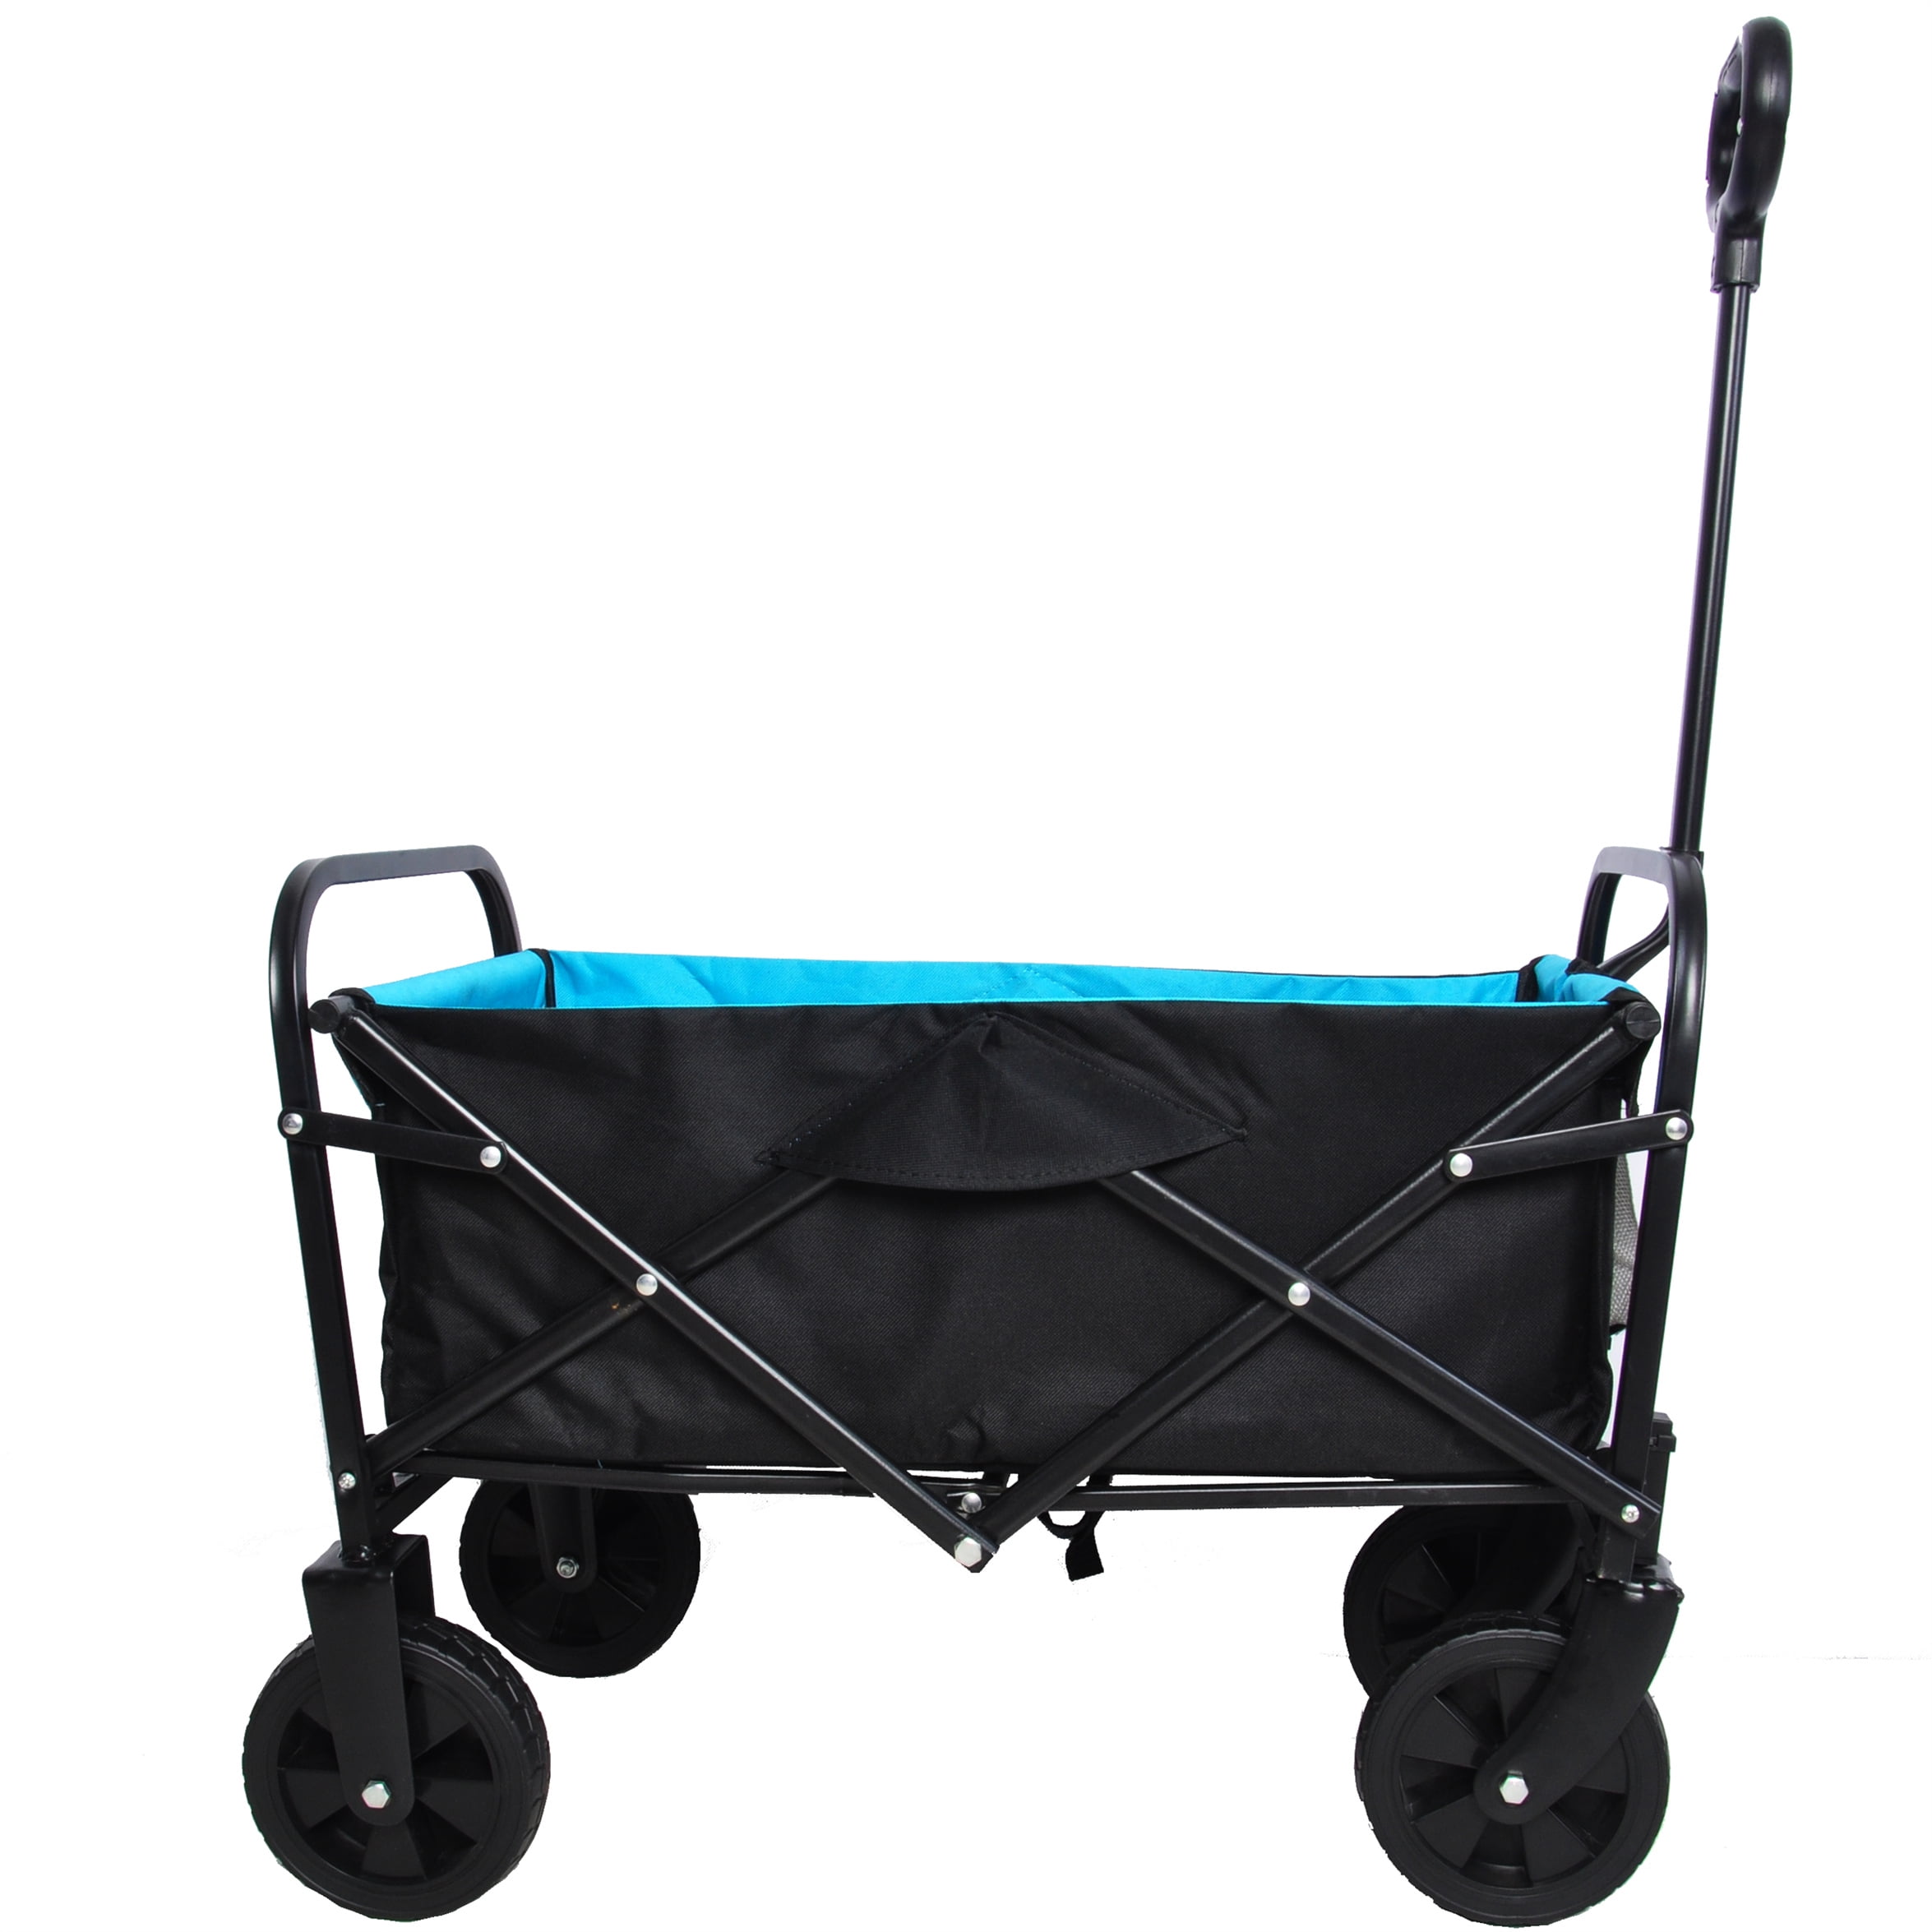 Multi-Function Folding Wagon- Durable Shopping Cart/ATV Trailer Oxford Cloth Waterproof Easy to Clean Used for Outdoor Activities Beaches Gardens Shopping 5 Days DELIVERY red Etc 